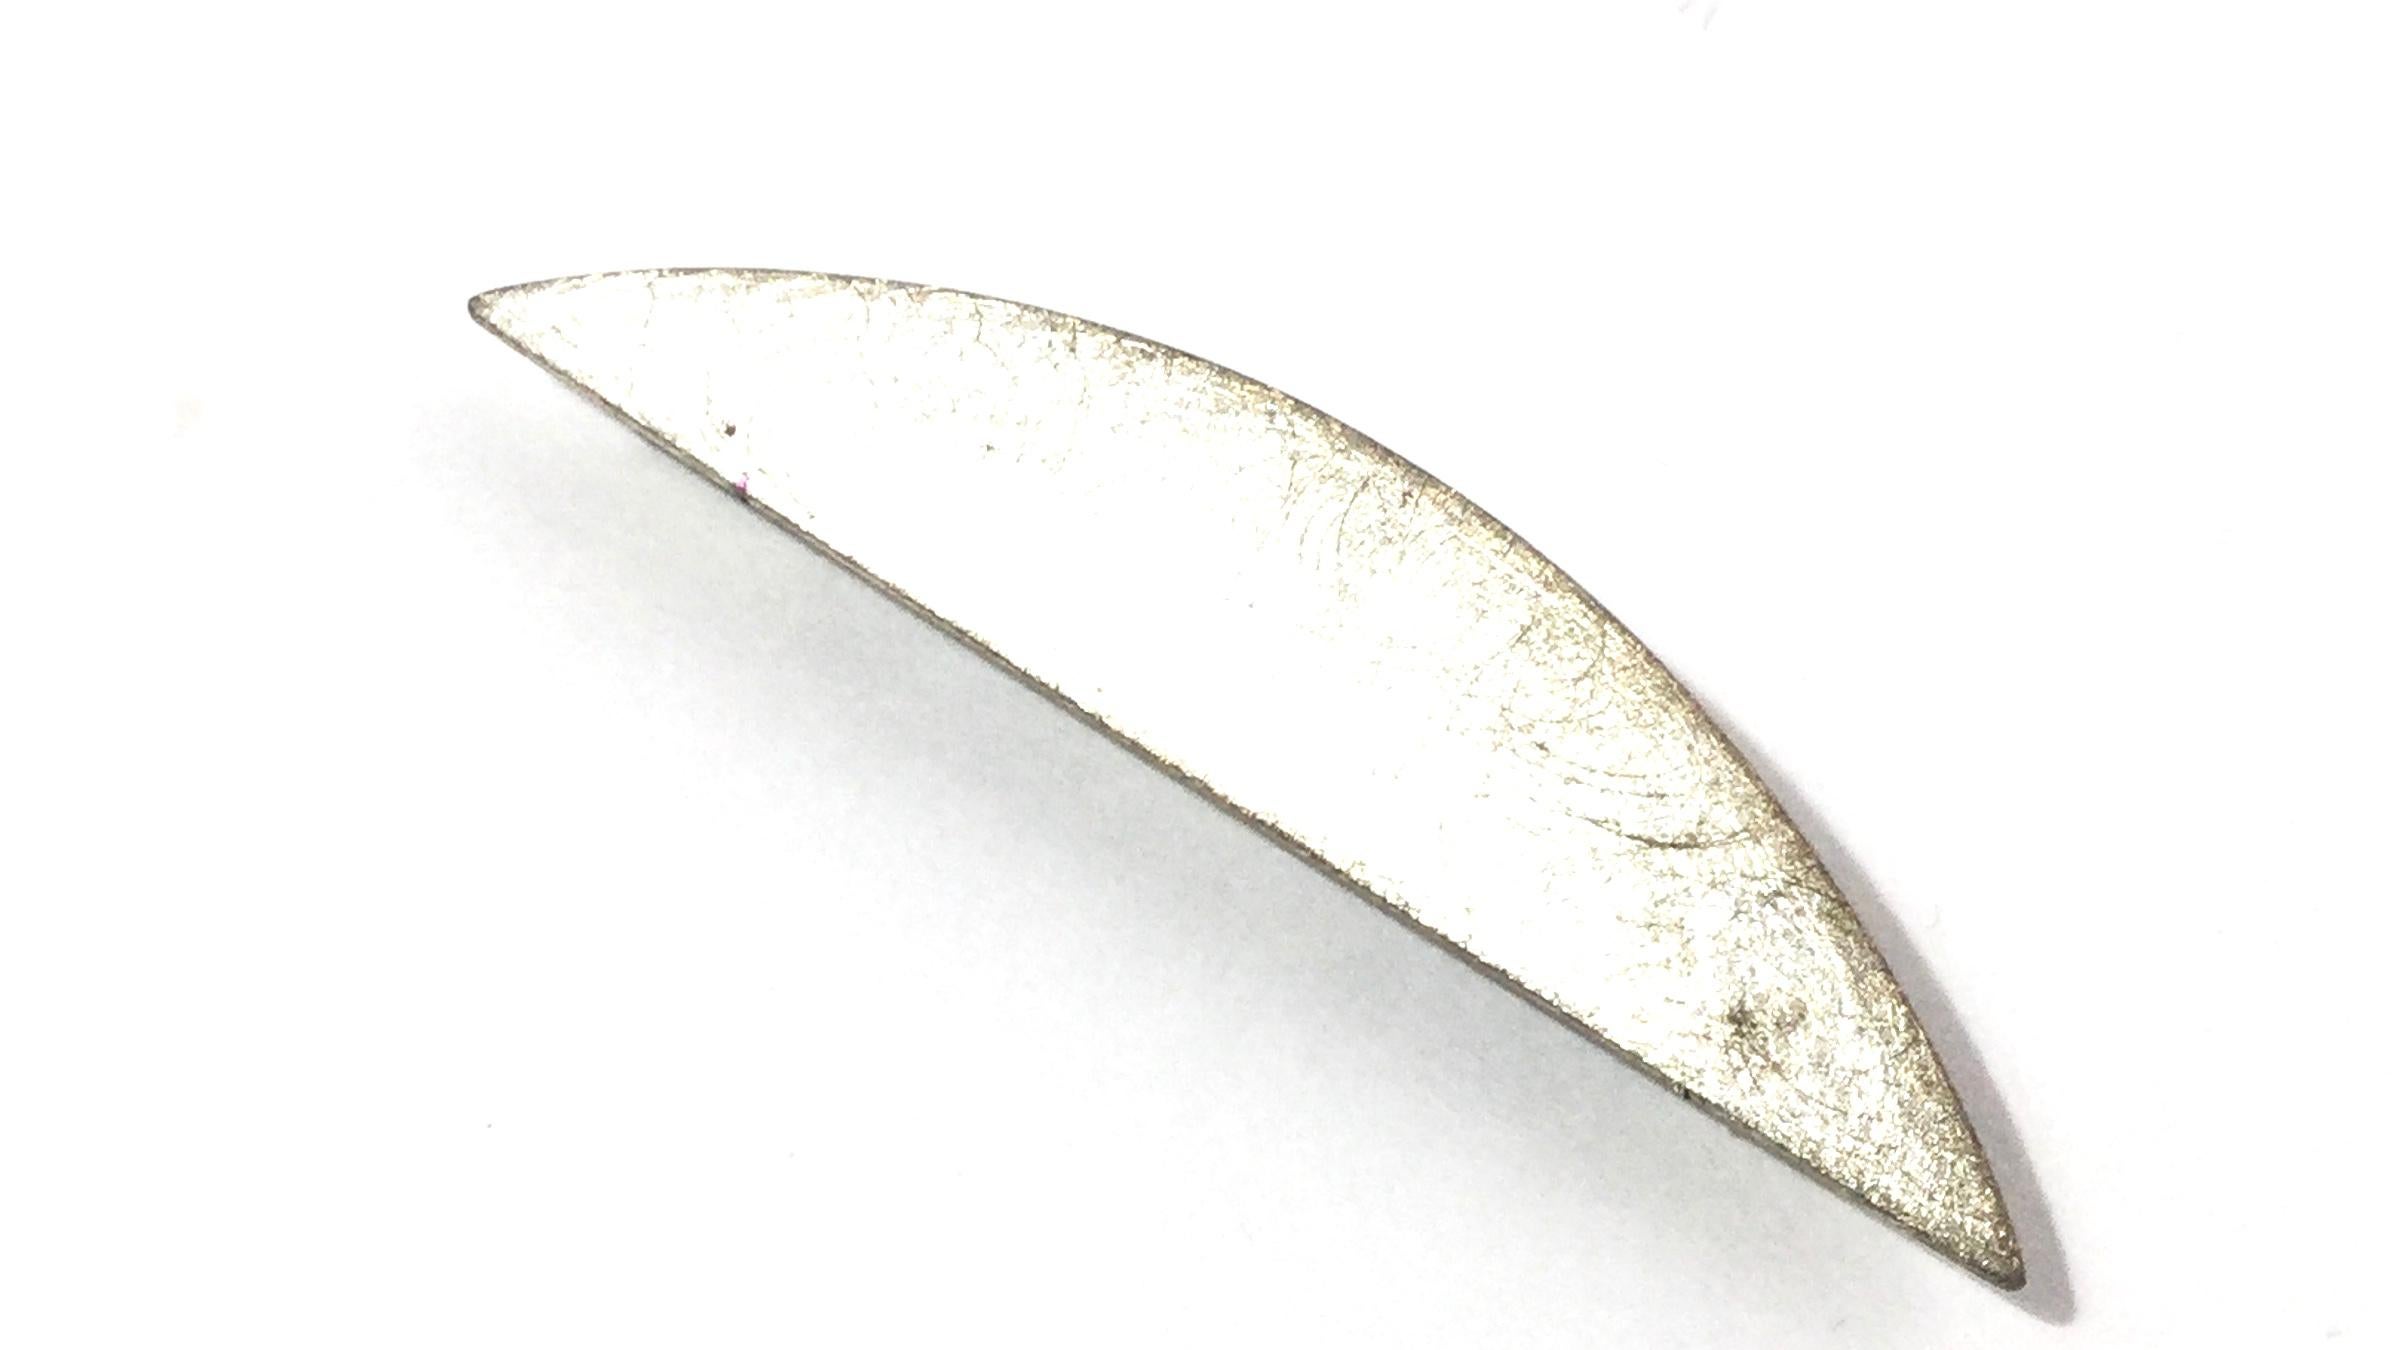 Marcin Zaremski Modernist Poland Brush Sterling Silver Brooch Pin

This is a fine Modernist, Poland Brush Sterling Silver Brooch Pin designed by Marcin Zaremski.

Measurements:   Brooch measures 2 3/4-in L x 1/2-in W.  9mm thickness.

Weight: 11.6 g